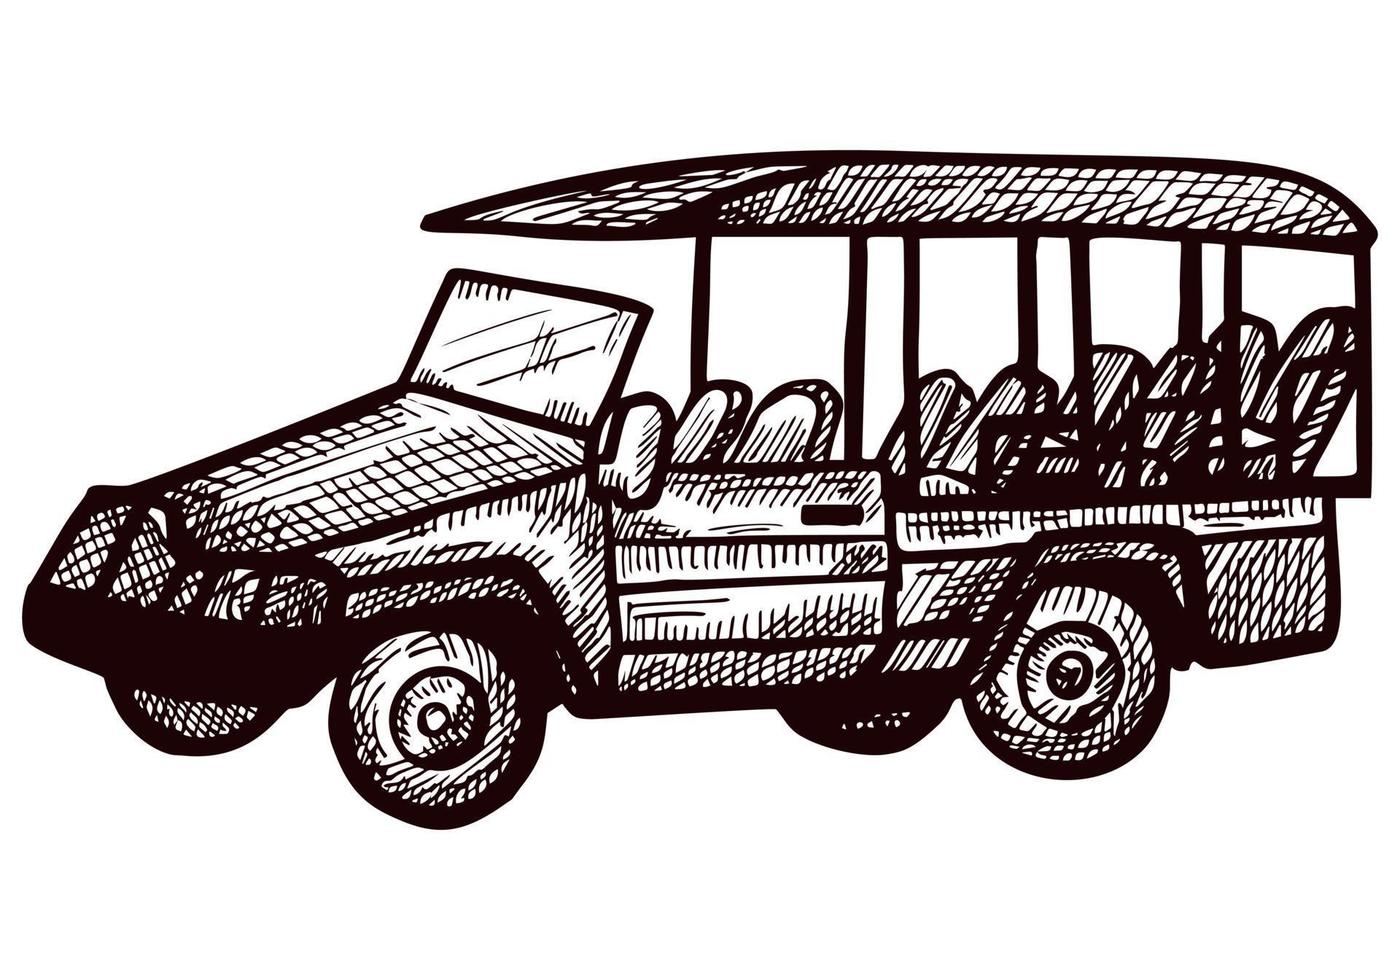 Safari bus sketch isolated. Vintage adventure off road car in hand drawn style. vector